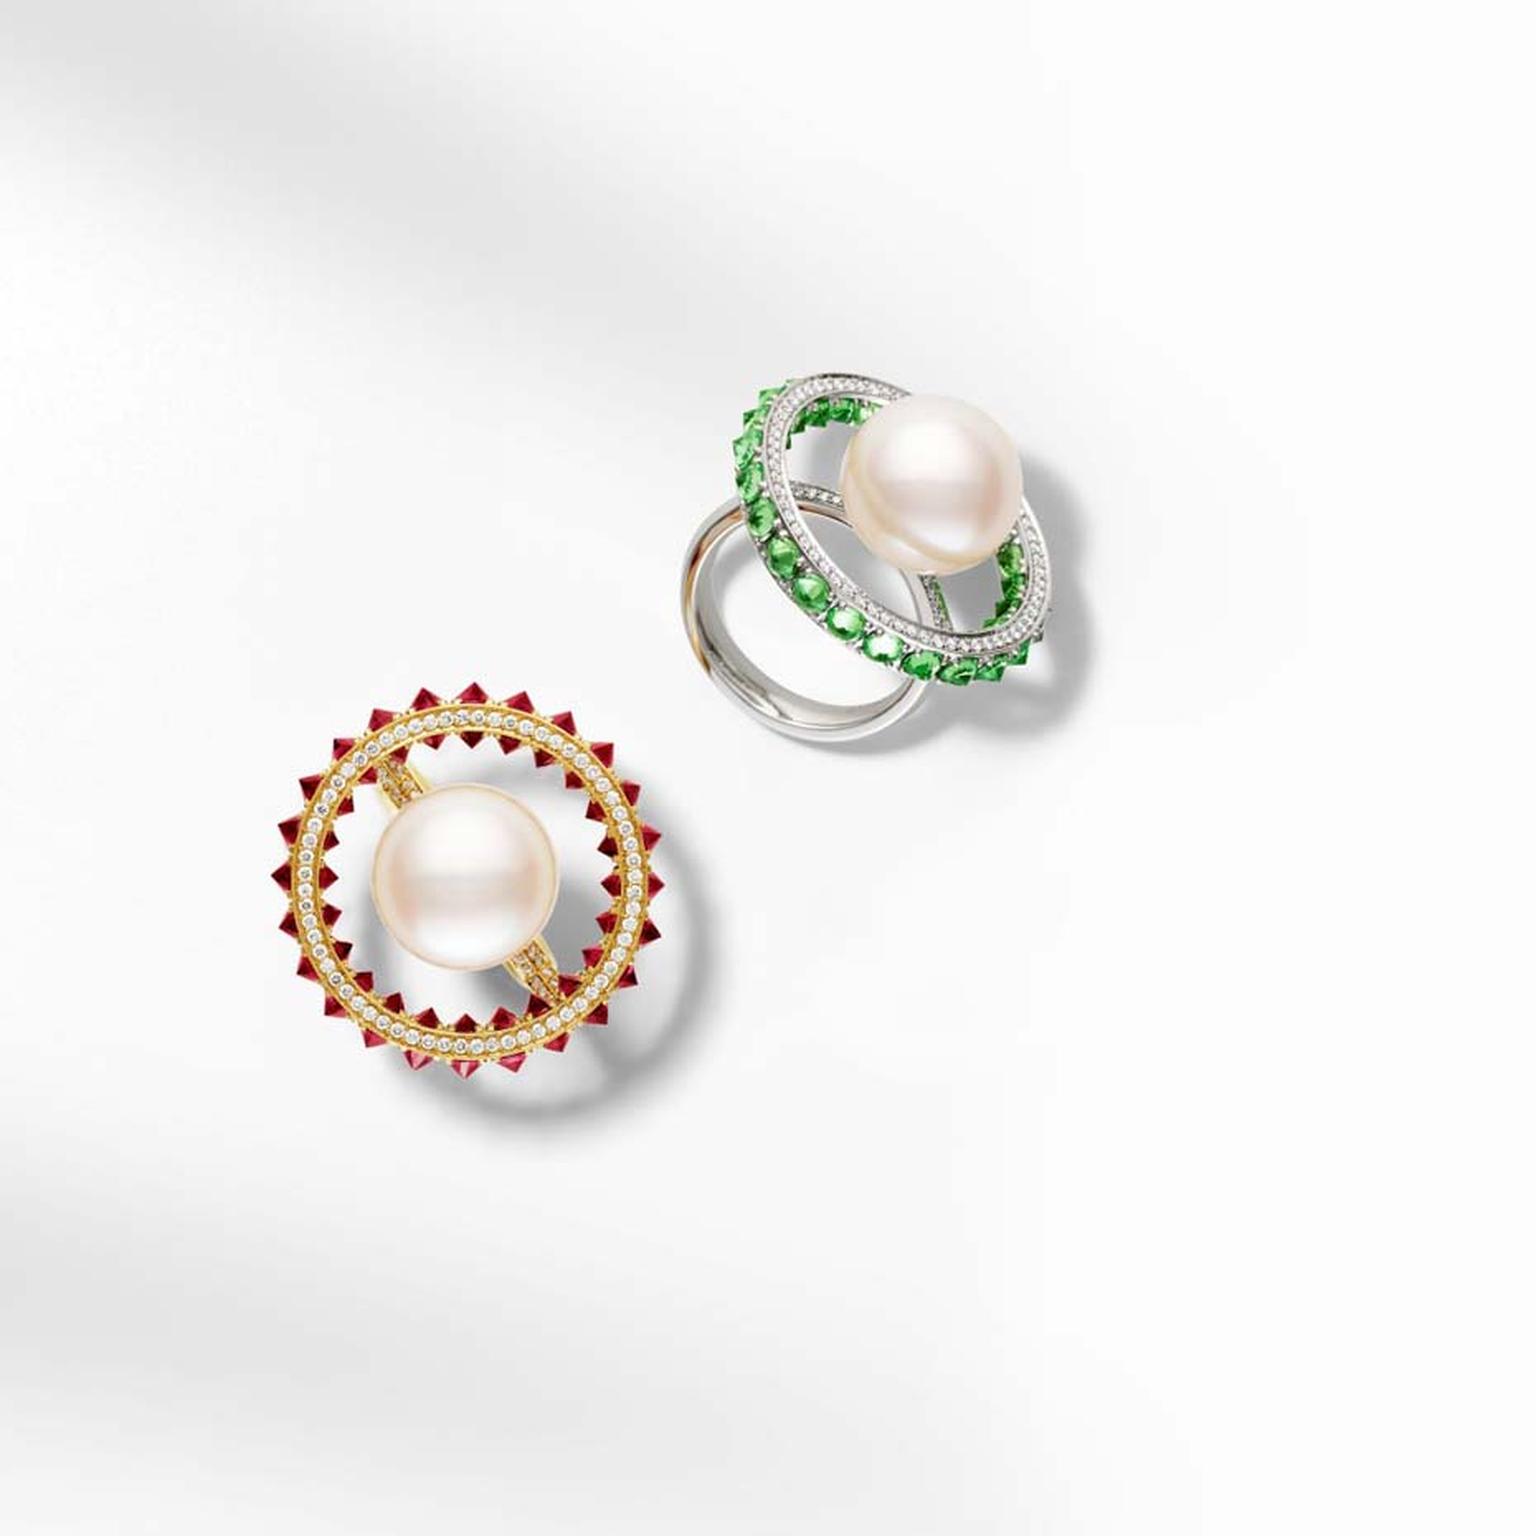 Paspaley Touchstone Australian South Sea pearl ring with rubies and white diamonds in yellow gold, and with tsavorites and white diamonds in white gold.